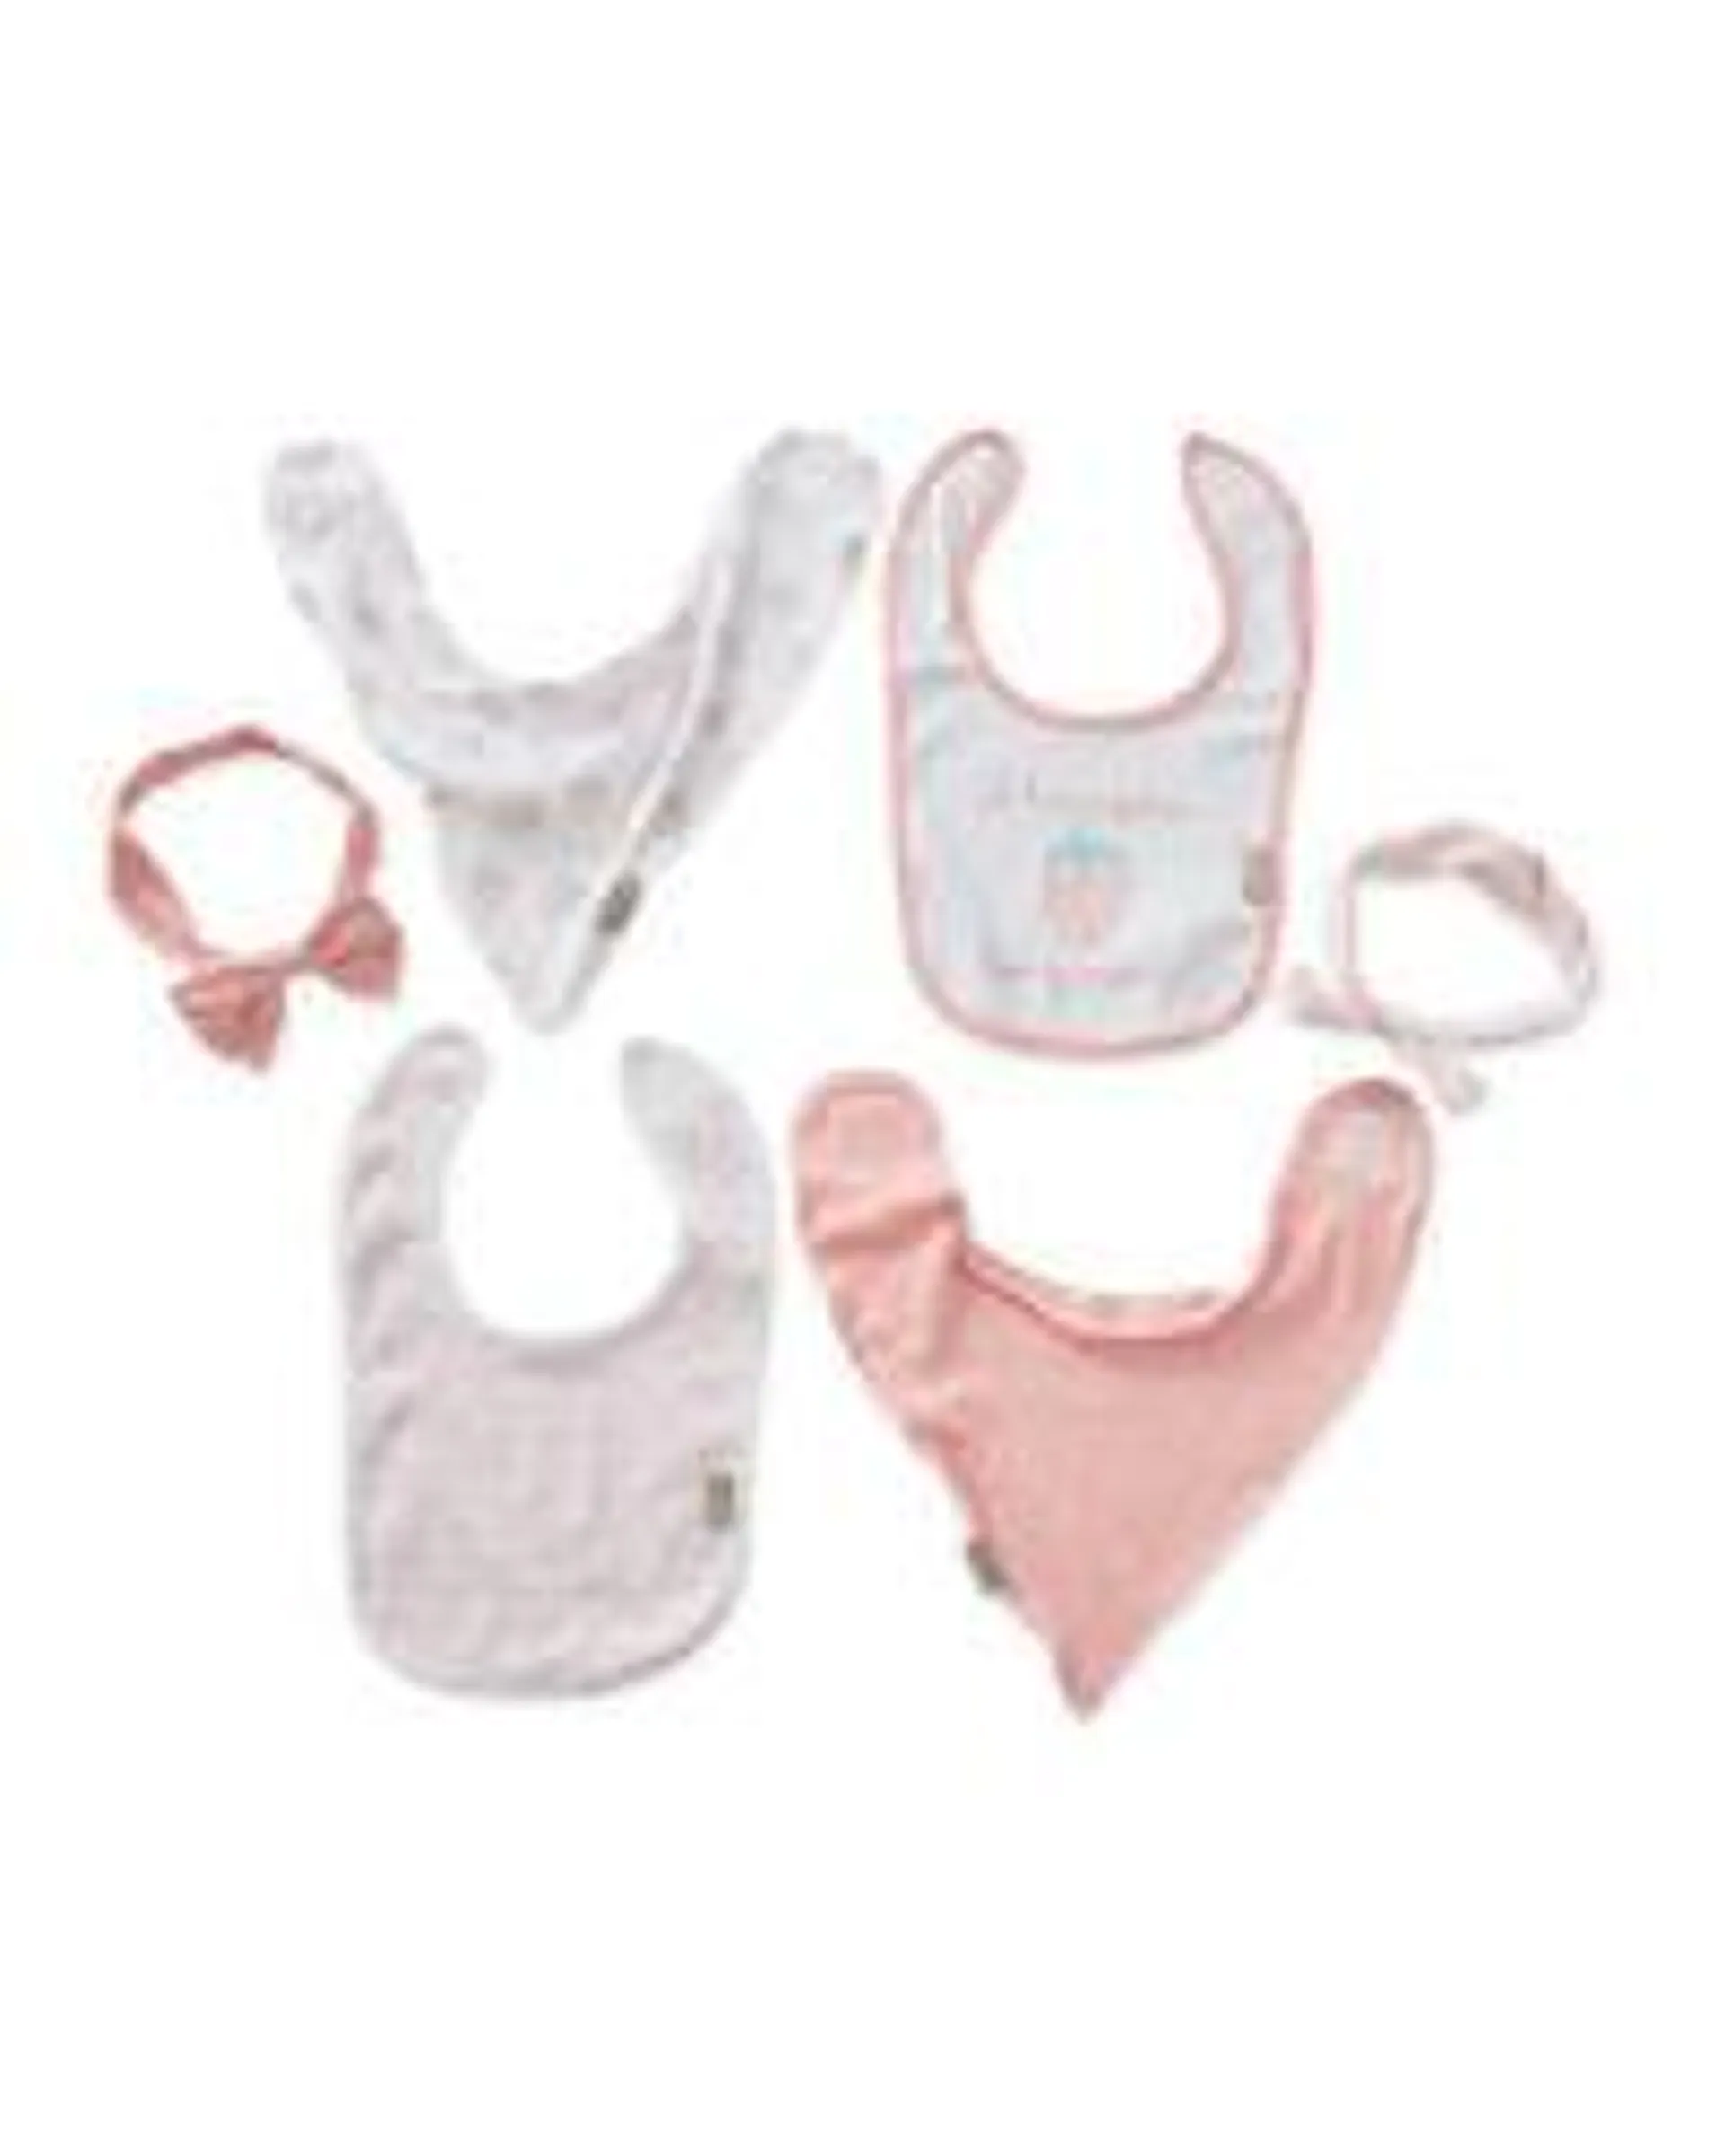 Strawberry Baby Accessory Gift Set